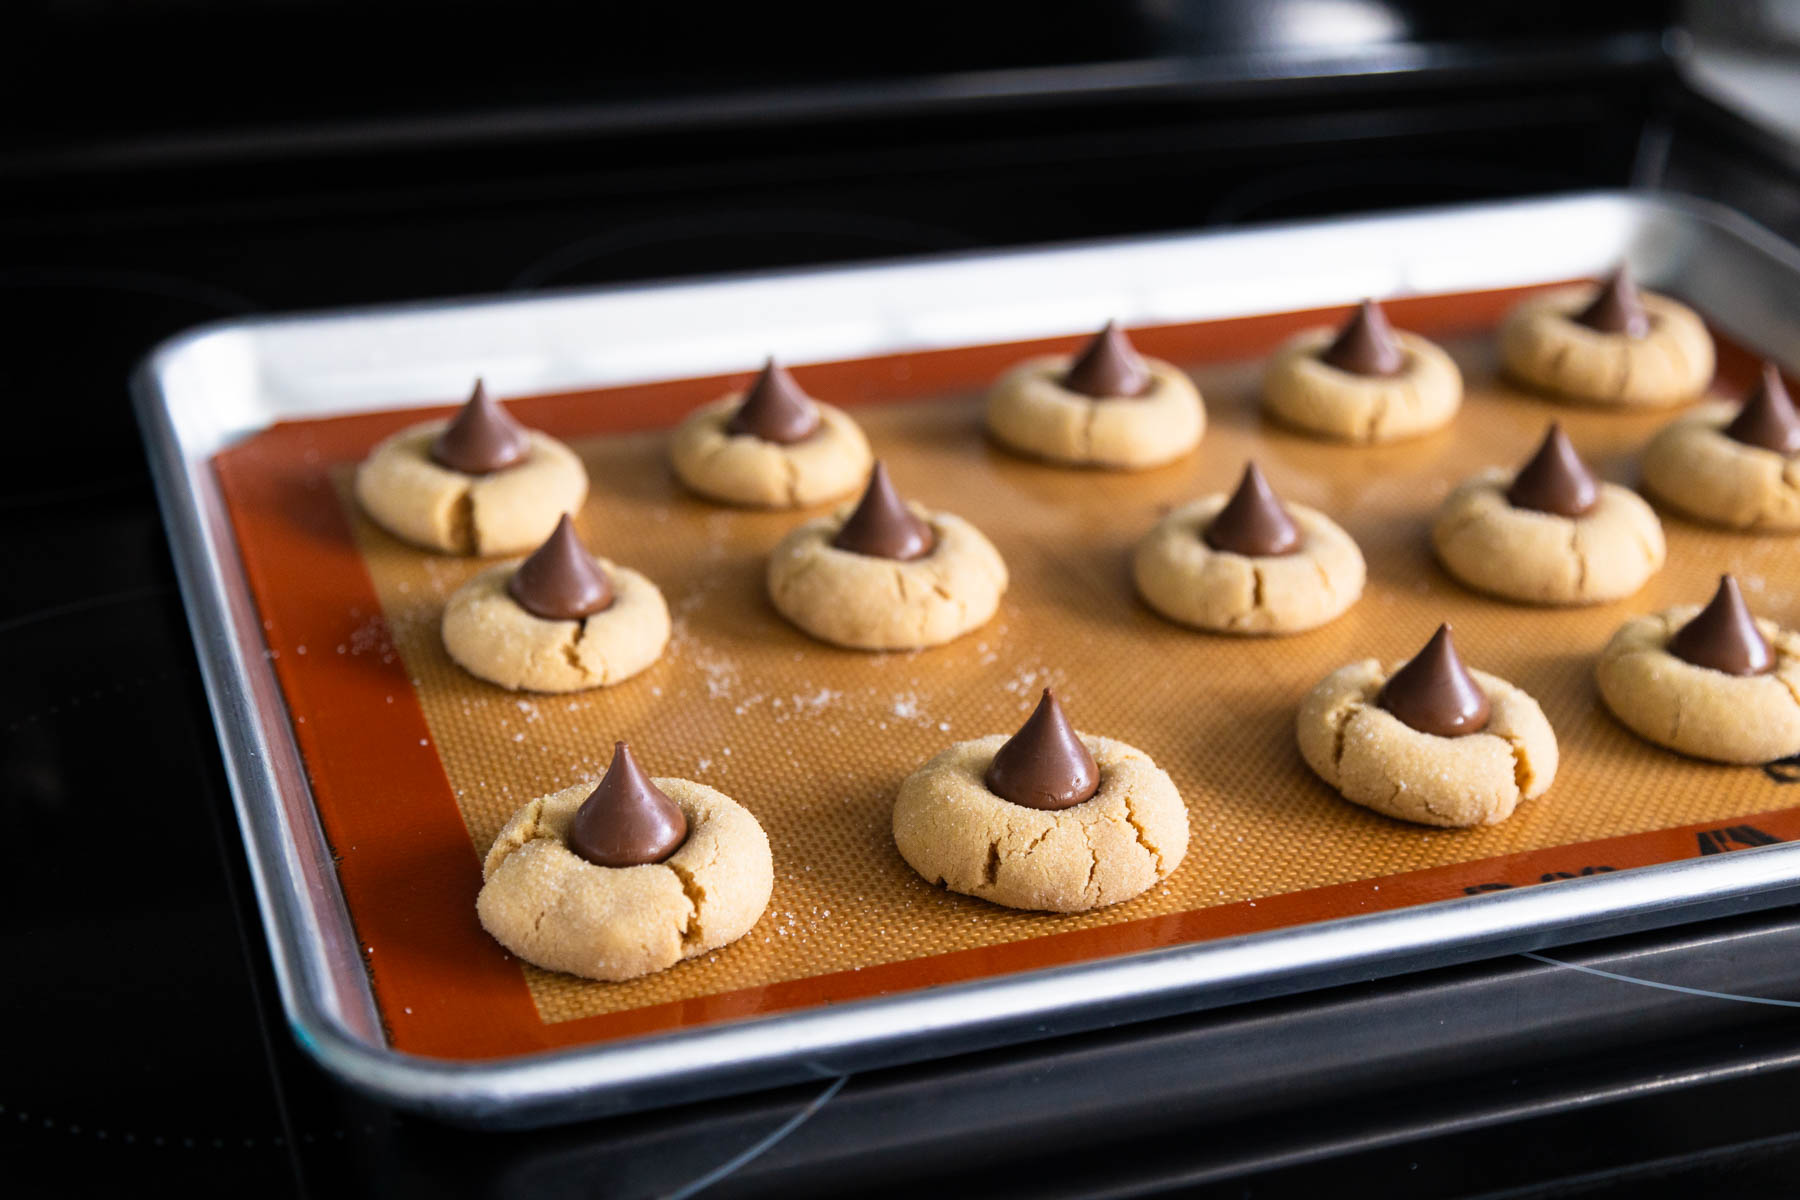 The baking pan of peanut butter blossoms is on the stovetop and the Hershey kisses have just been added to the tops.